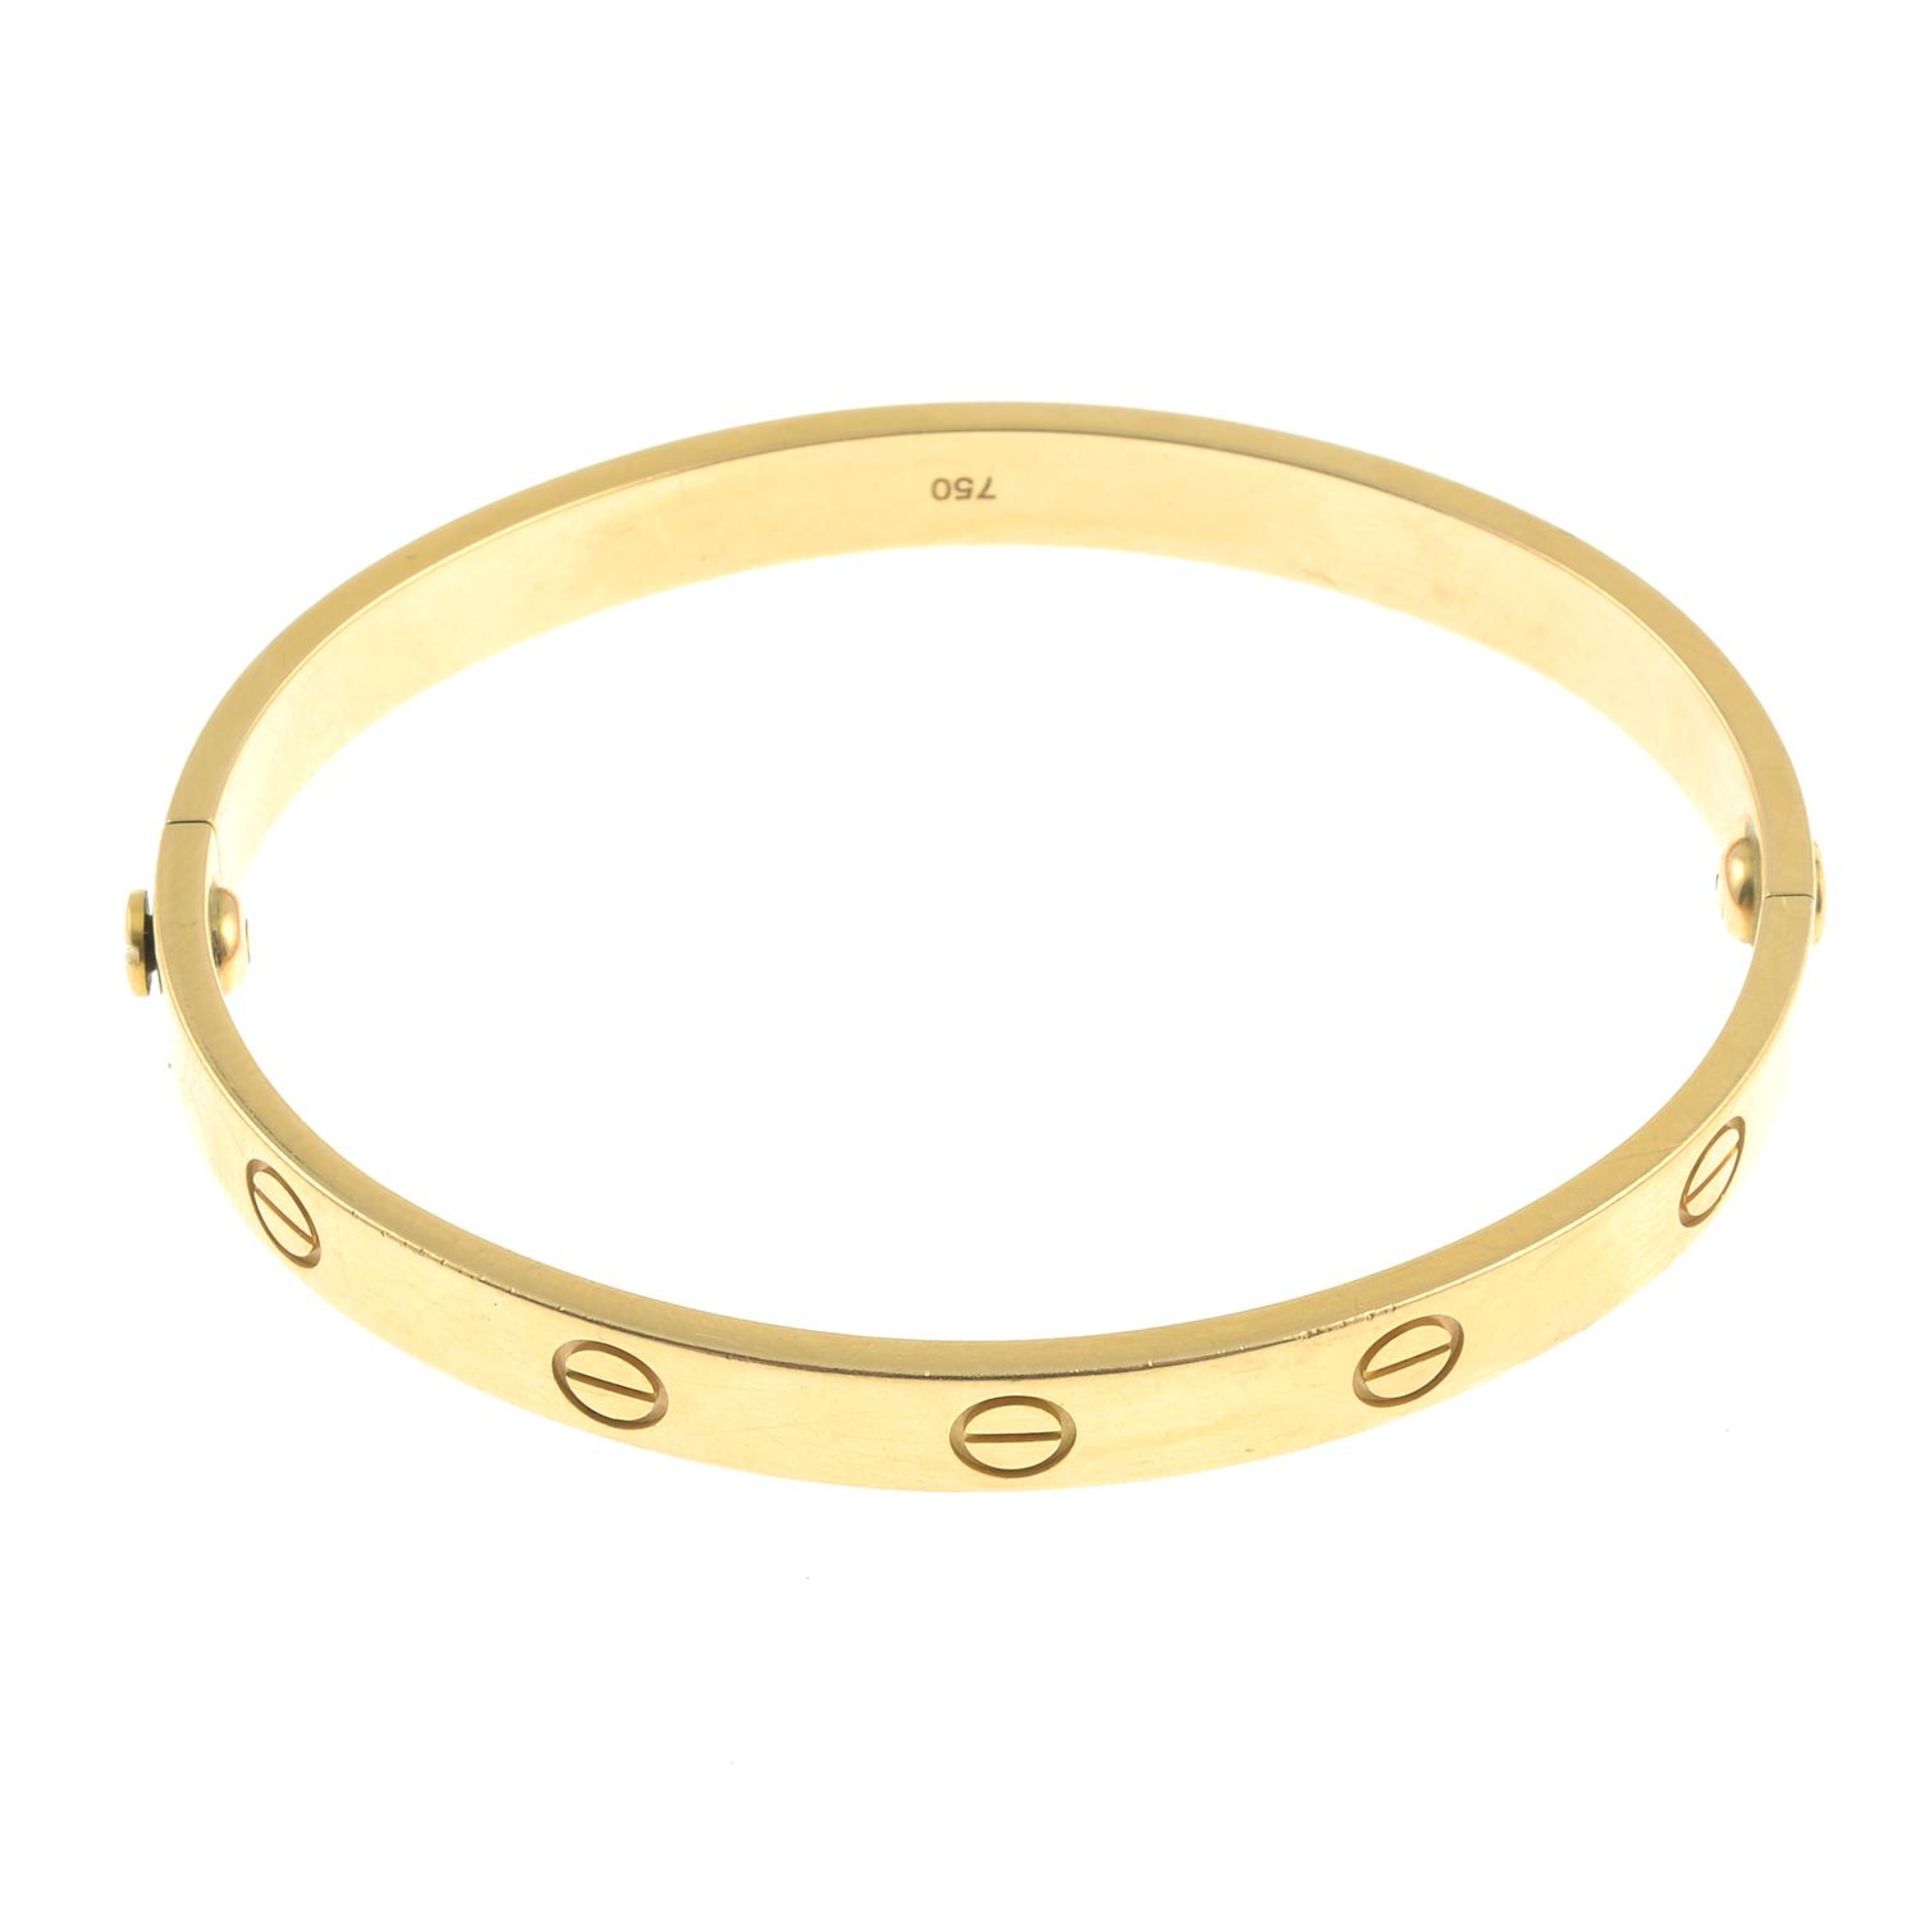 An 18ct gold 'Love' bangle, by Cartier. - Image 2 of 4